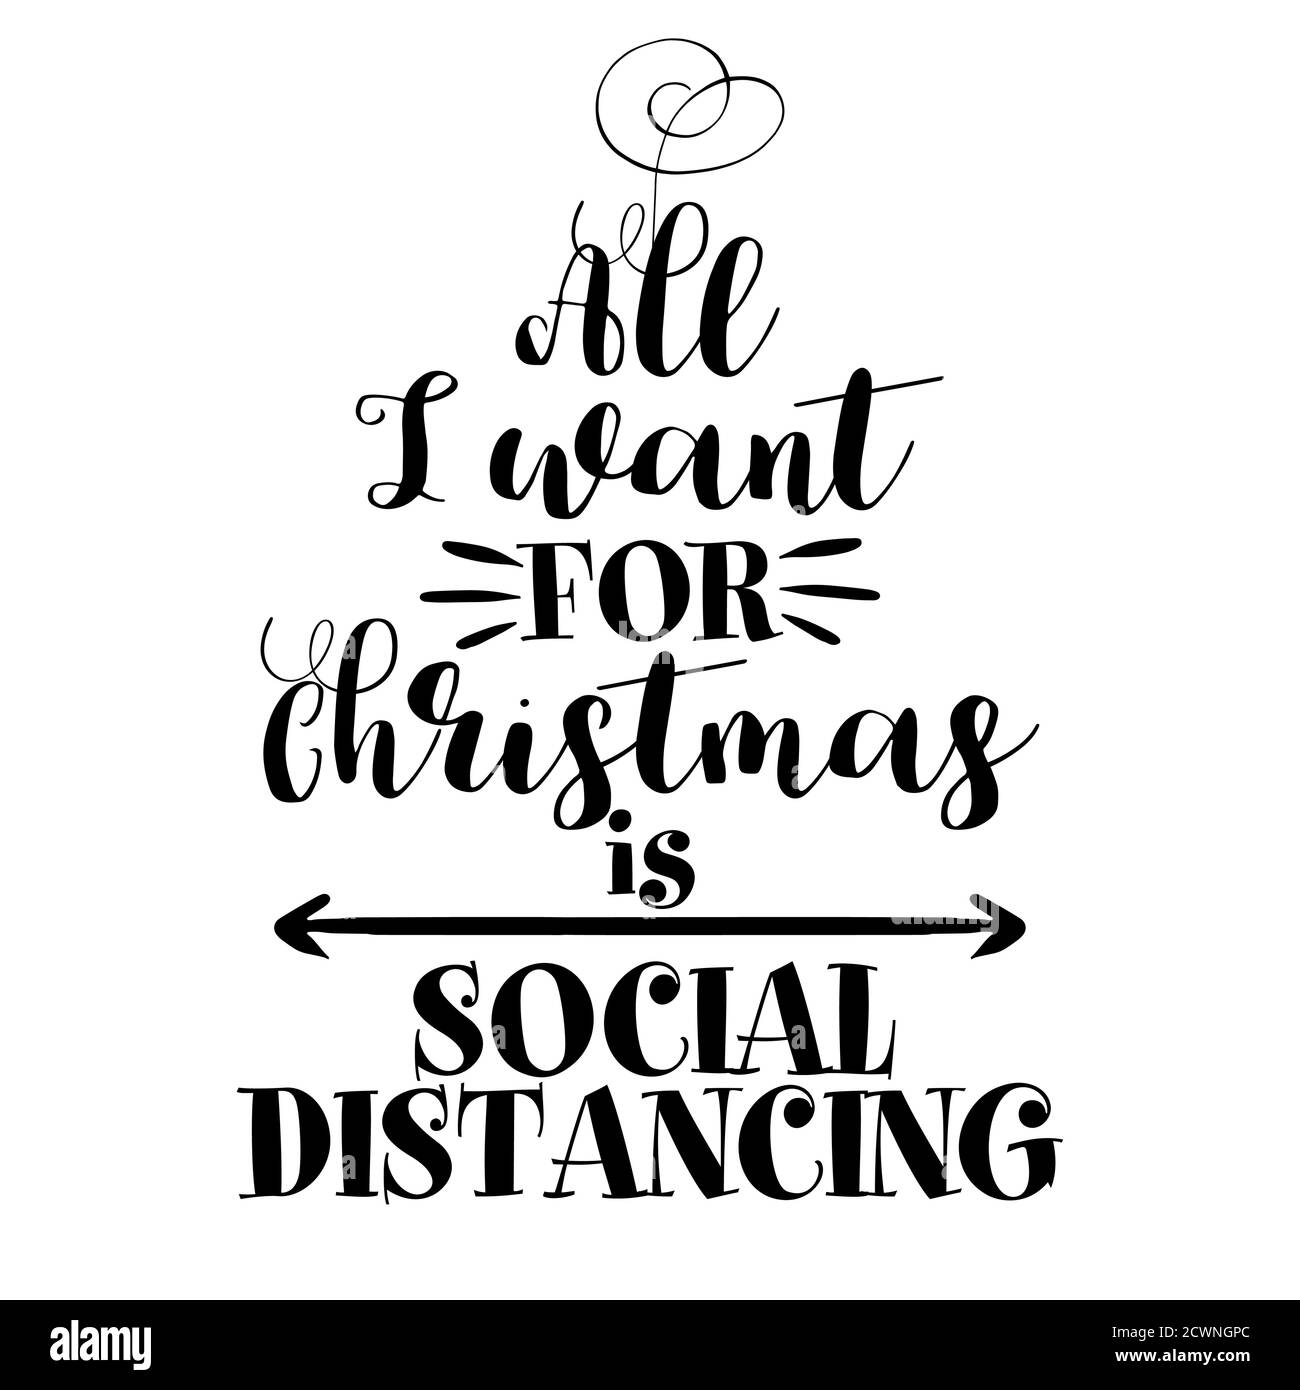 All I want for Christmas is Social distancing - Awareness lettering phrase. Social distancing poster with text for self quarantine. Hand letter script Stock Vector